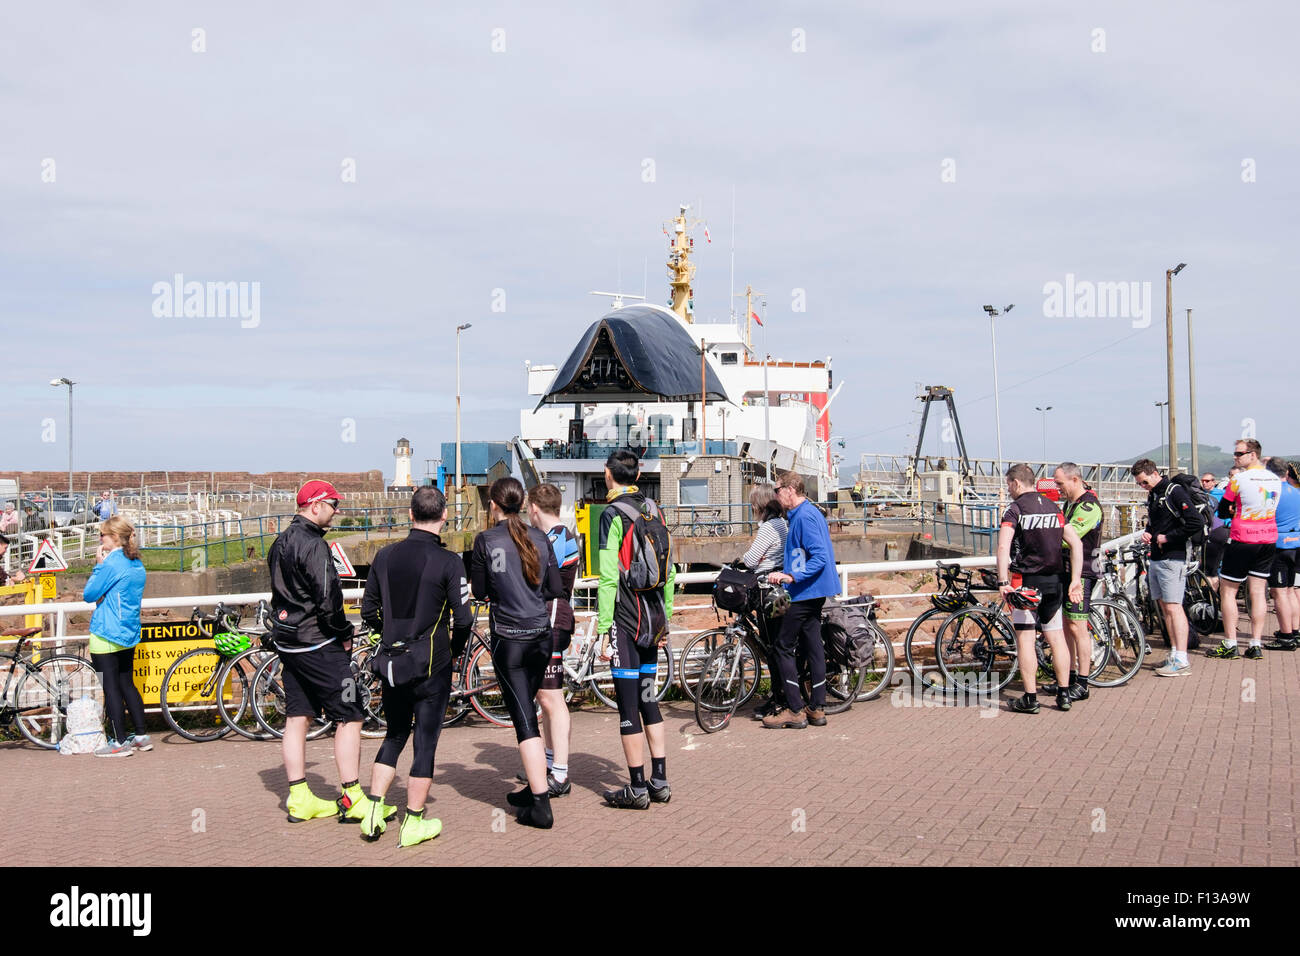 Cyclists waiting for the Arran ferry at terminal in port of Ardrossen, South Ayrshire, Strathclyde, Scotland, UK, Britain Stock Photo